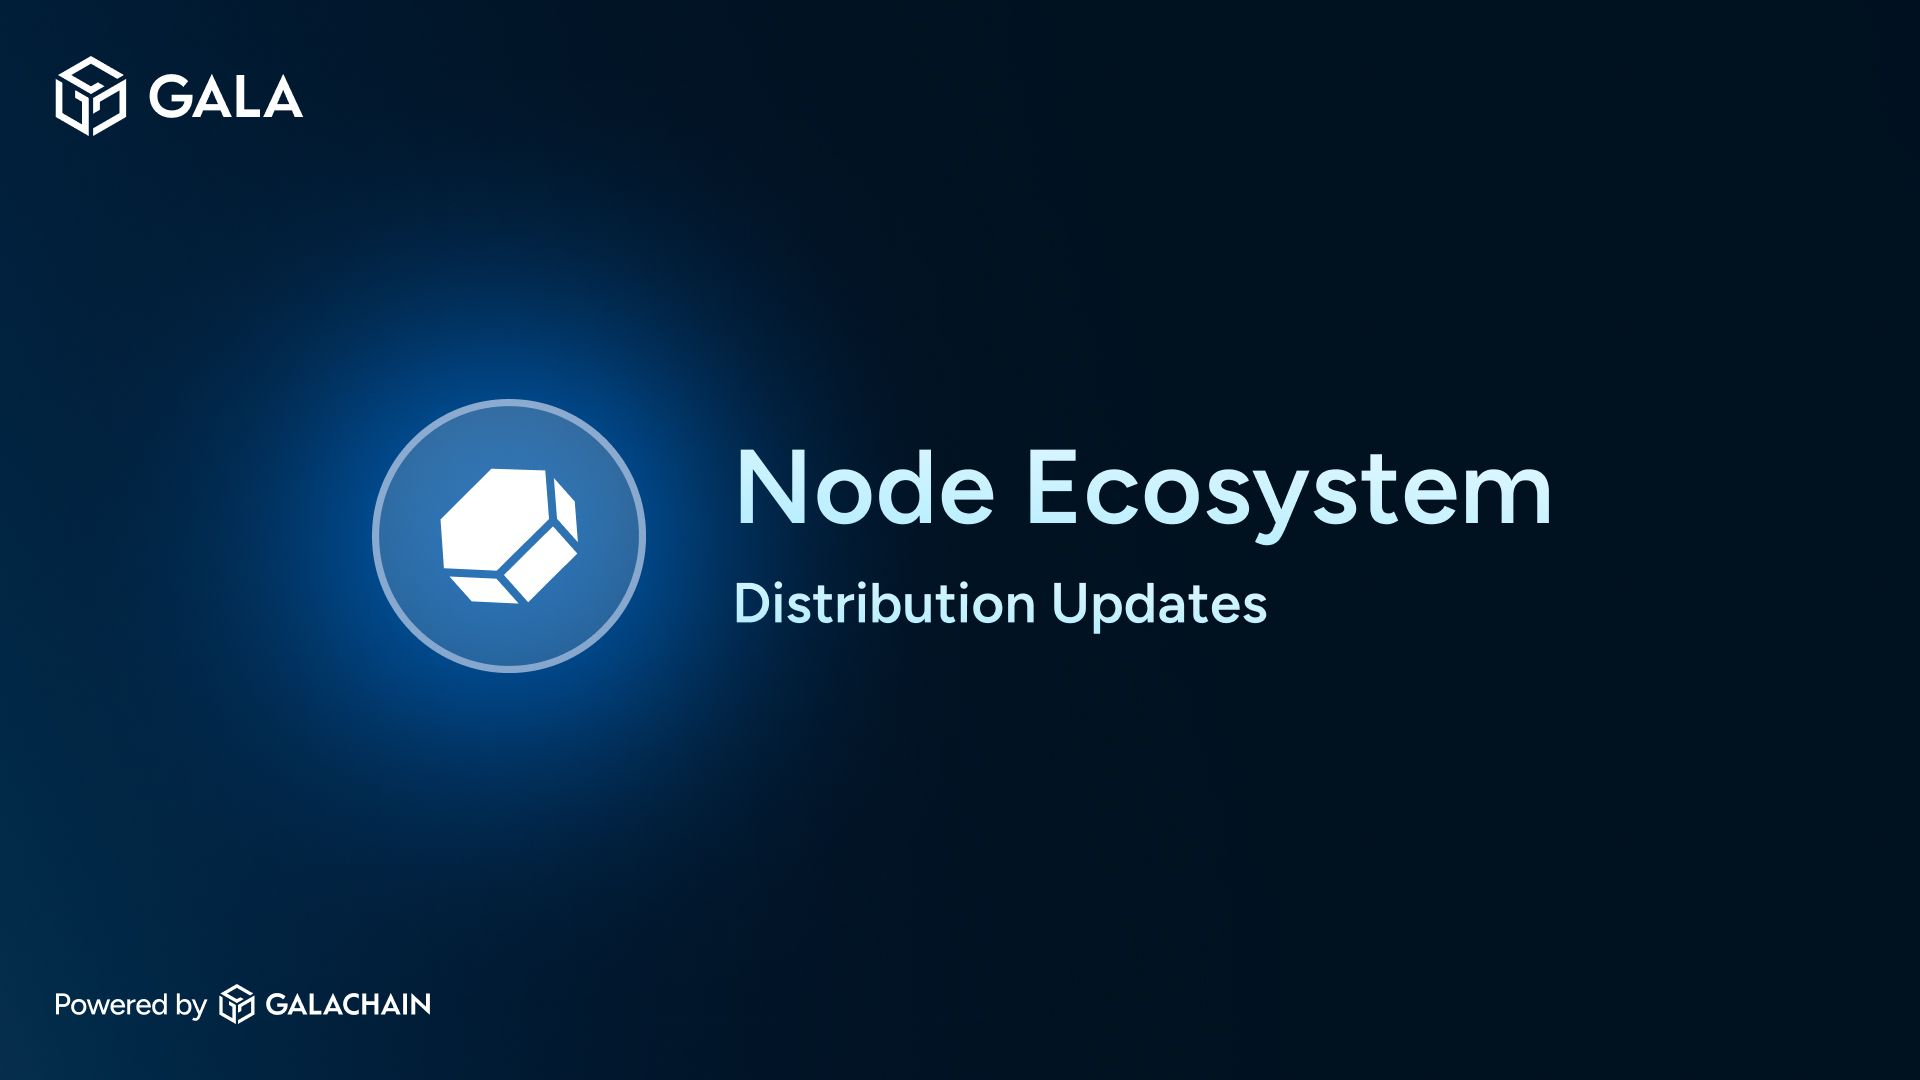 The Gala Node ecosystem powers one of the largest decentralized computing networks in the world.